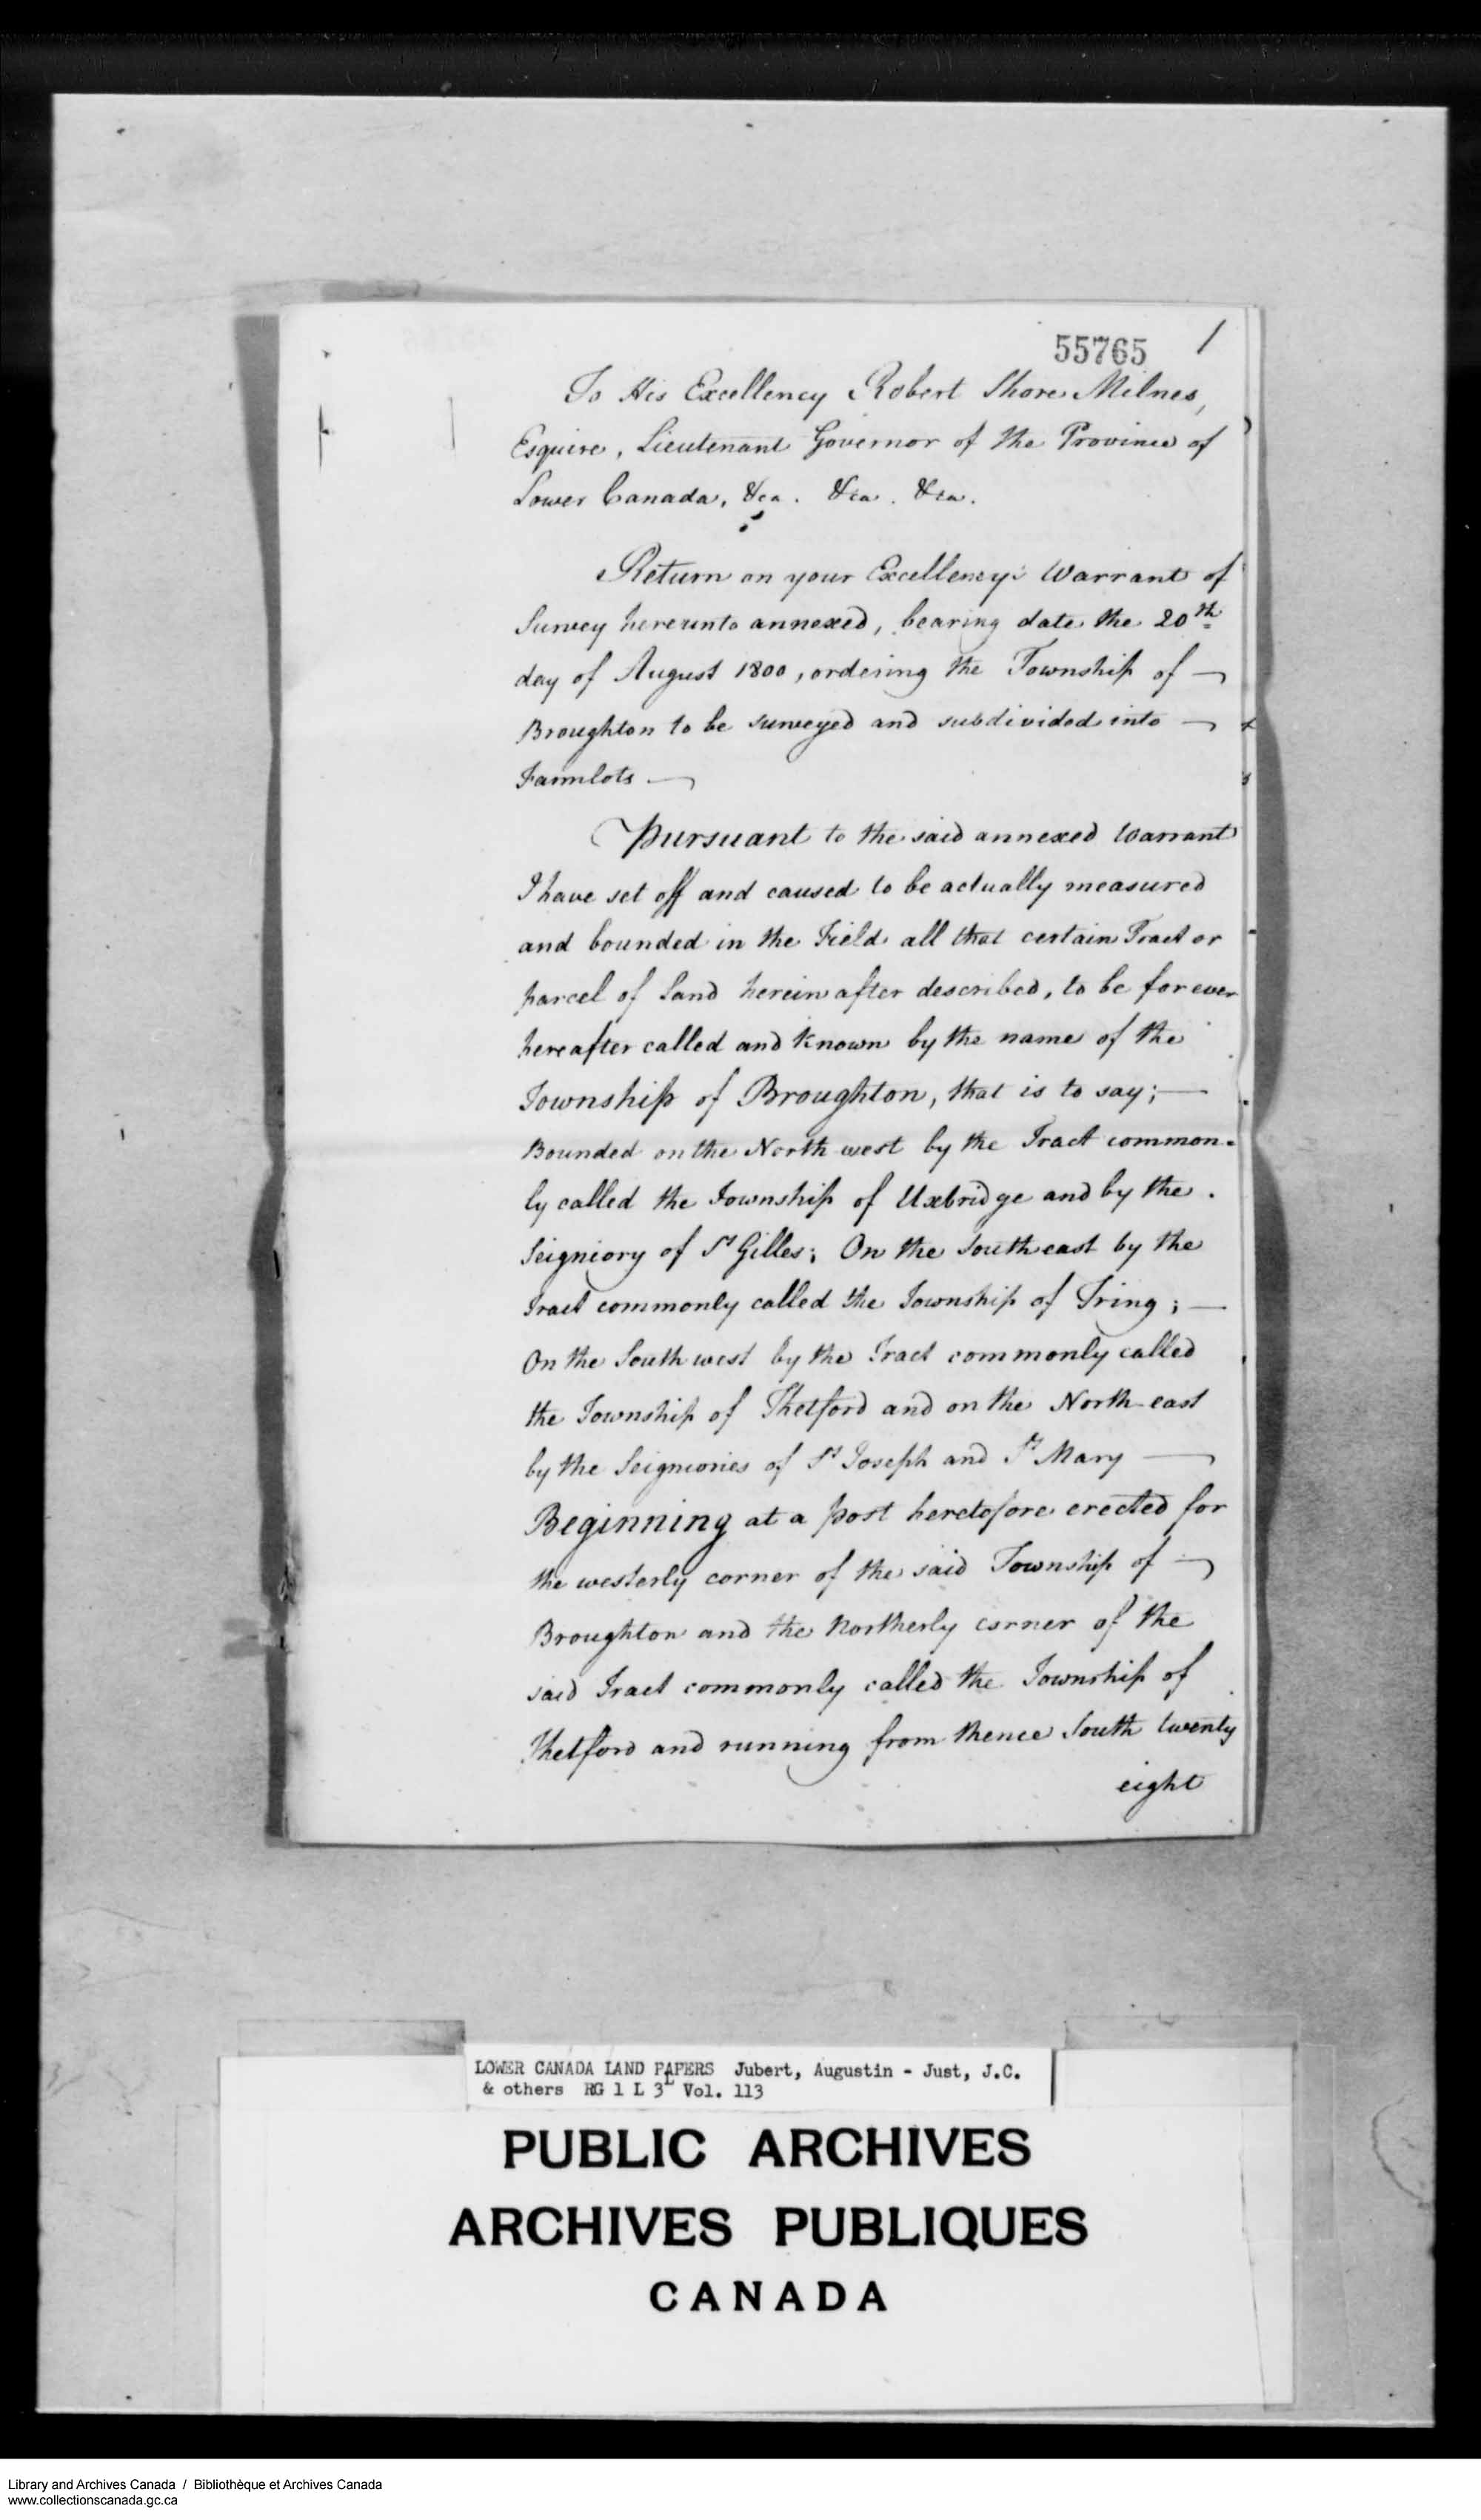 Digitized page of  for Image No.: e008700253